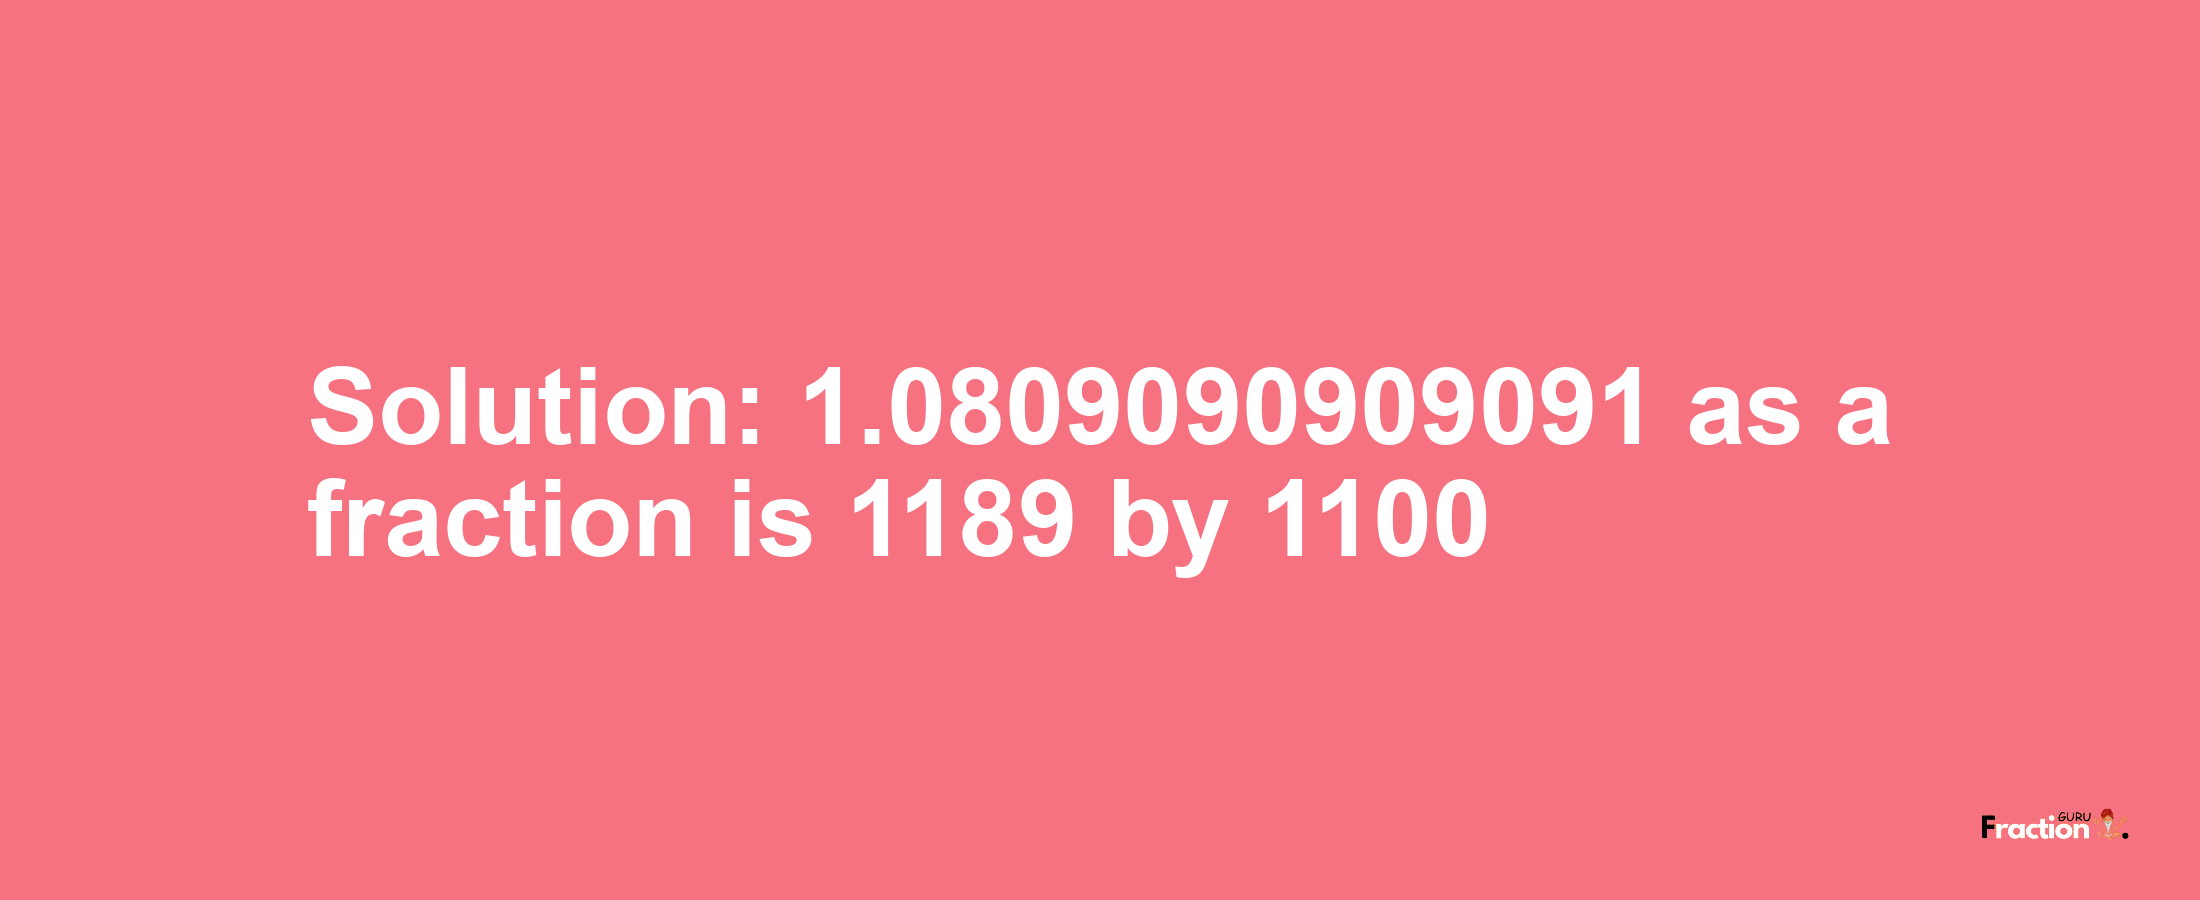 Solution:1.0809090909091 as a fraction is 1189/1100